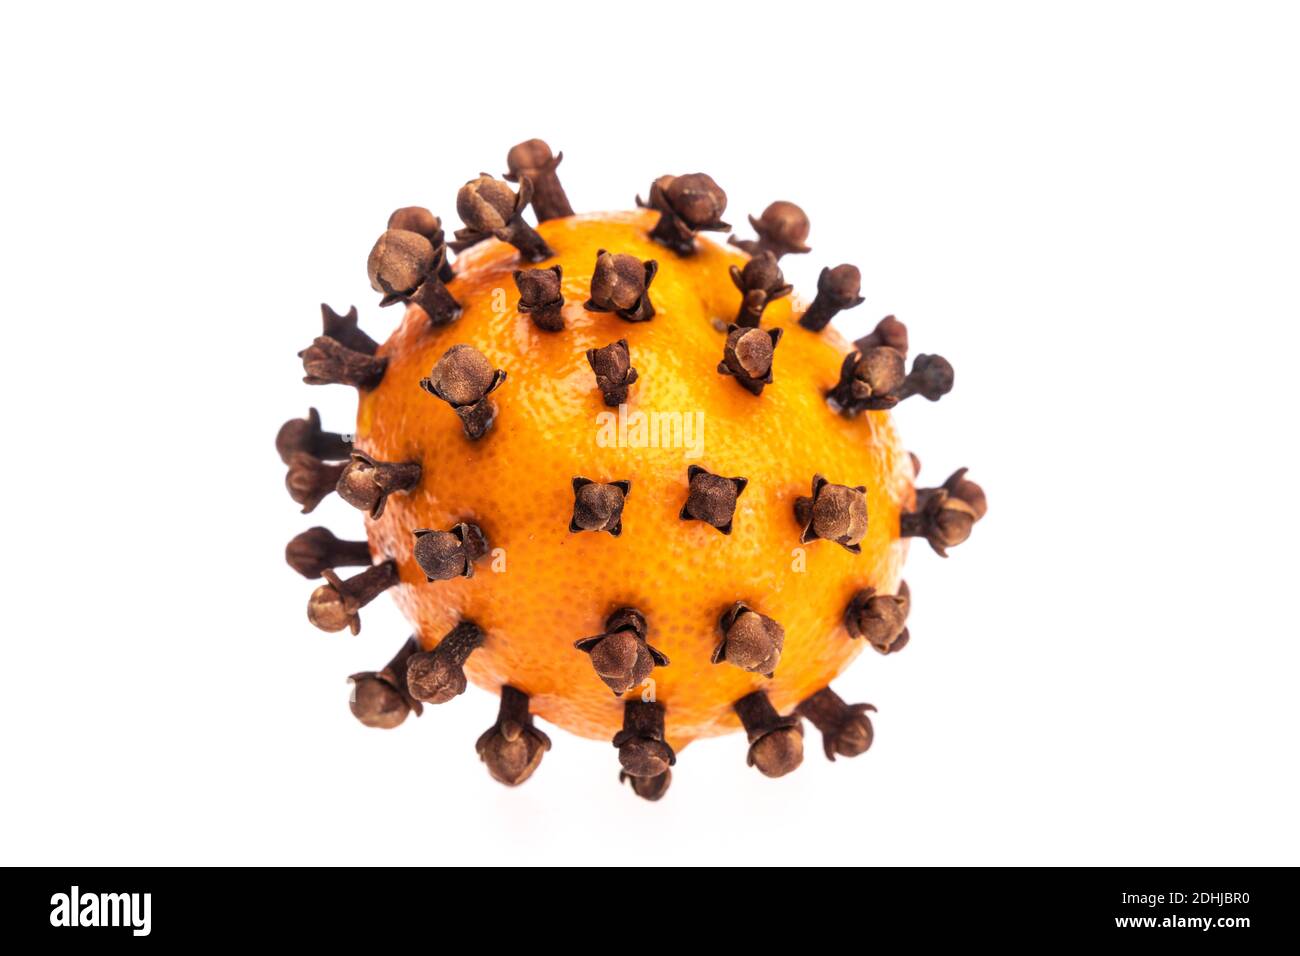 A satsuma srtuck with cloves for Christmas 2020 mulled wine - or as a tree ornament likely to go soggy very quickly. Clovid-19... Stock Photo